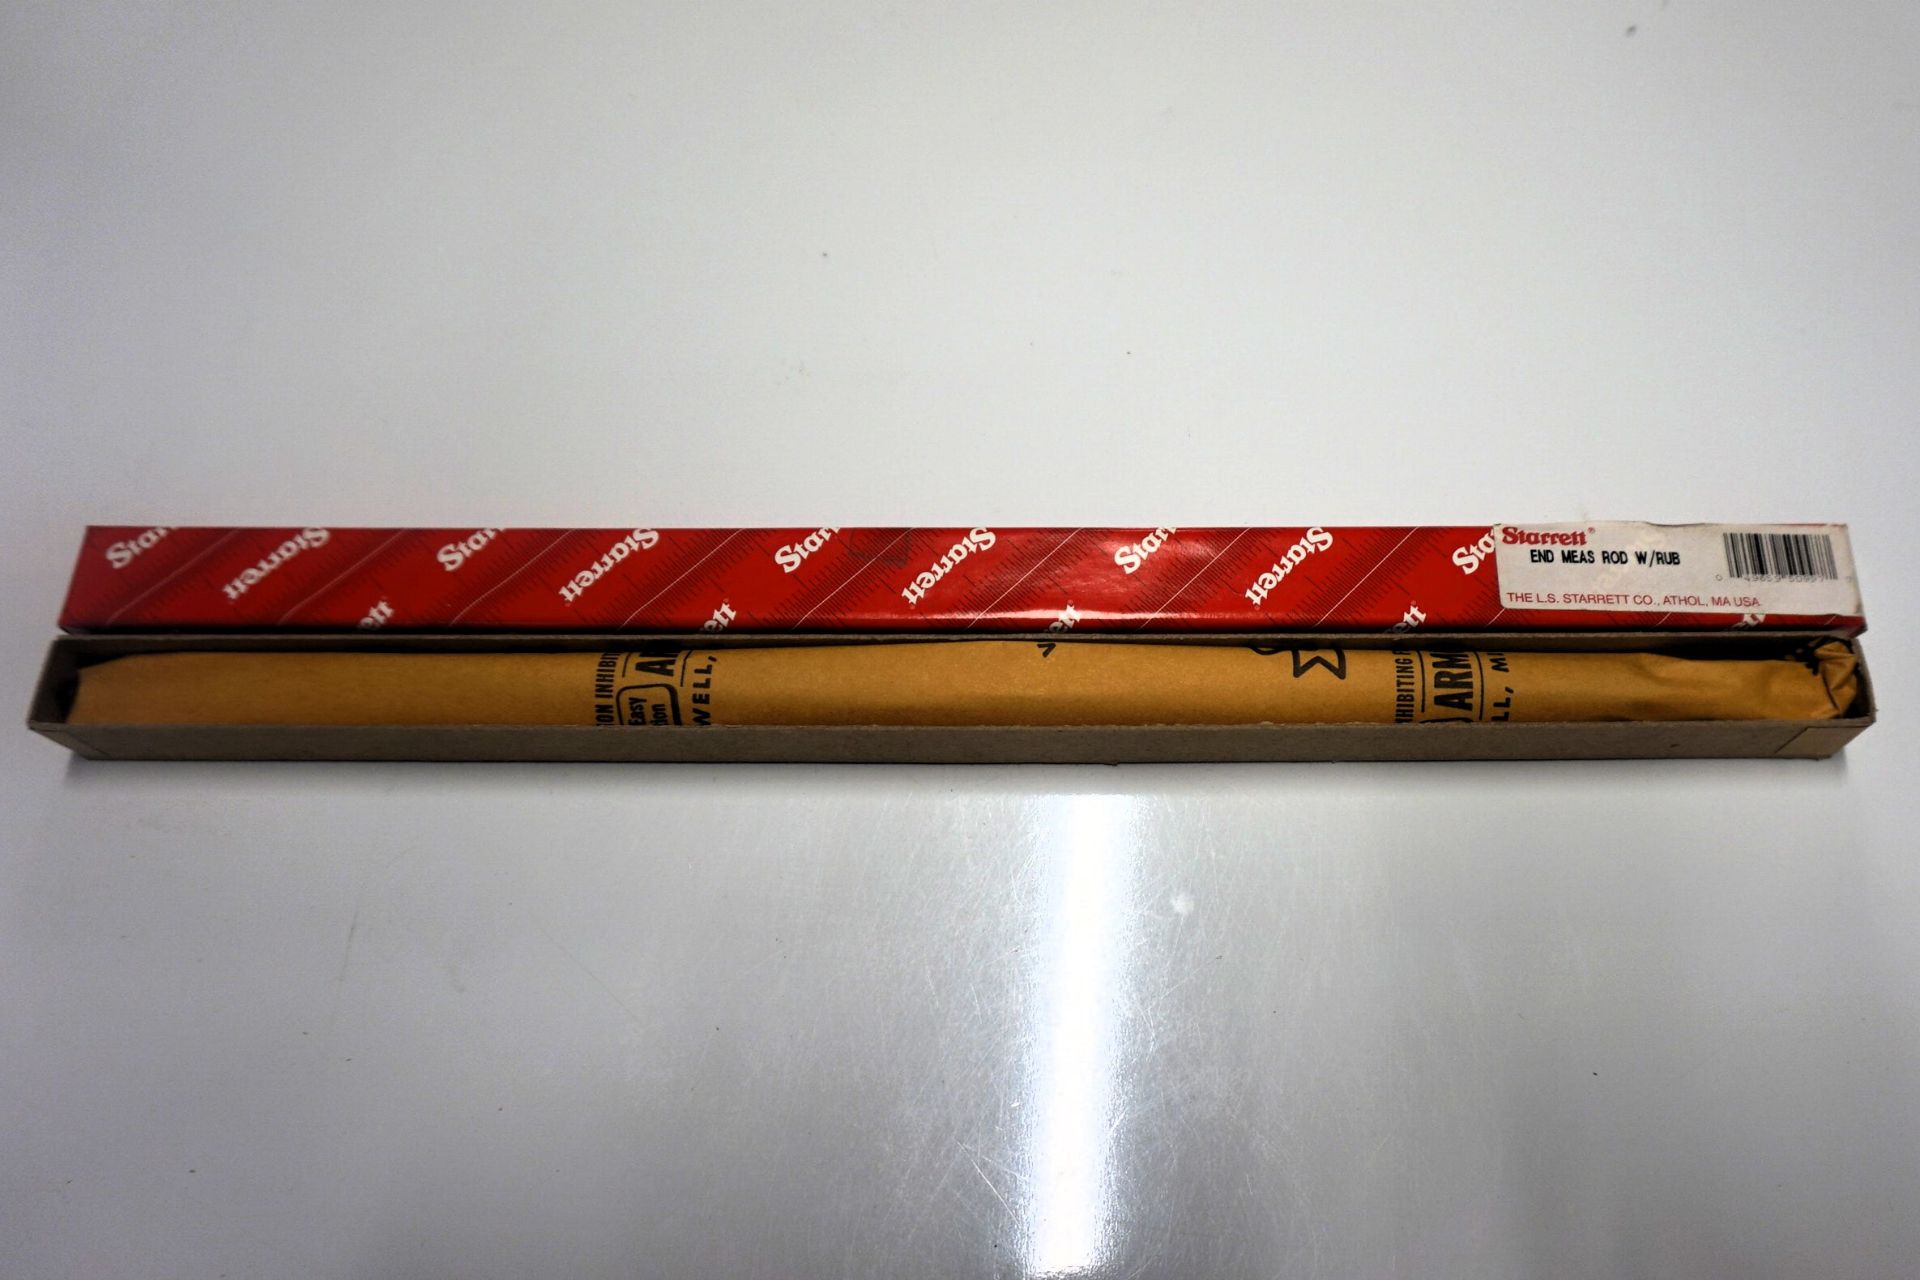 Model No. 234A-15 End Measuring Rod with Insulated Handle and Spherical Ends. 15" Length.